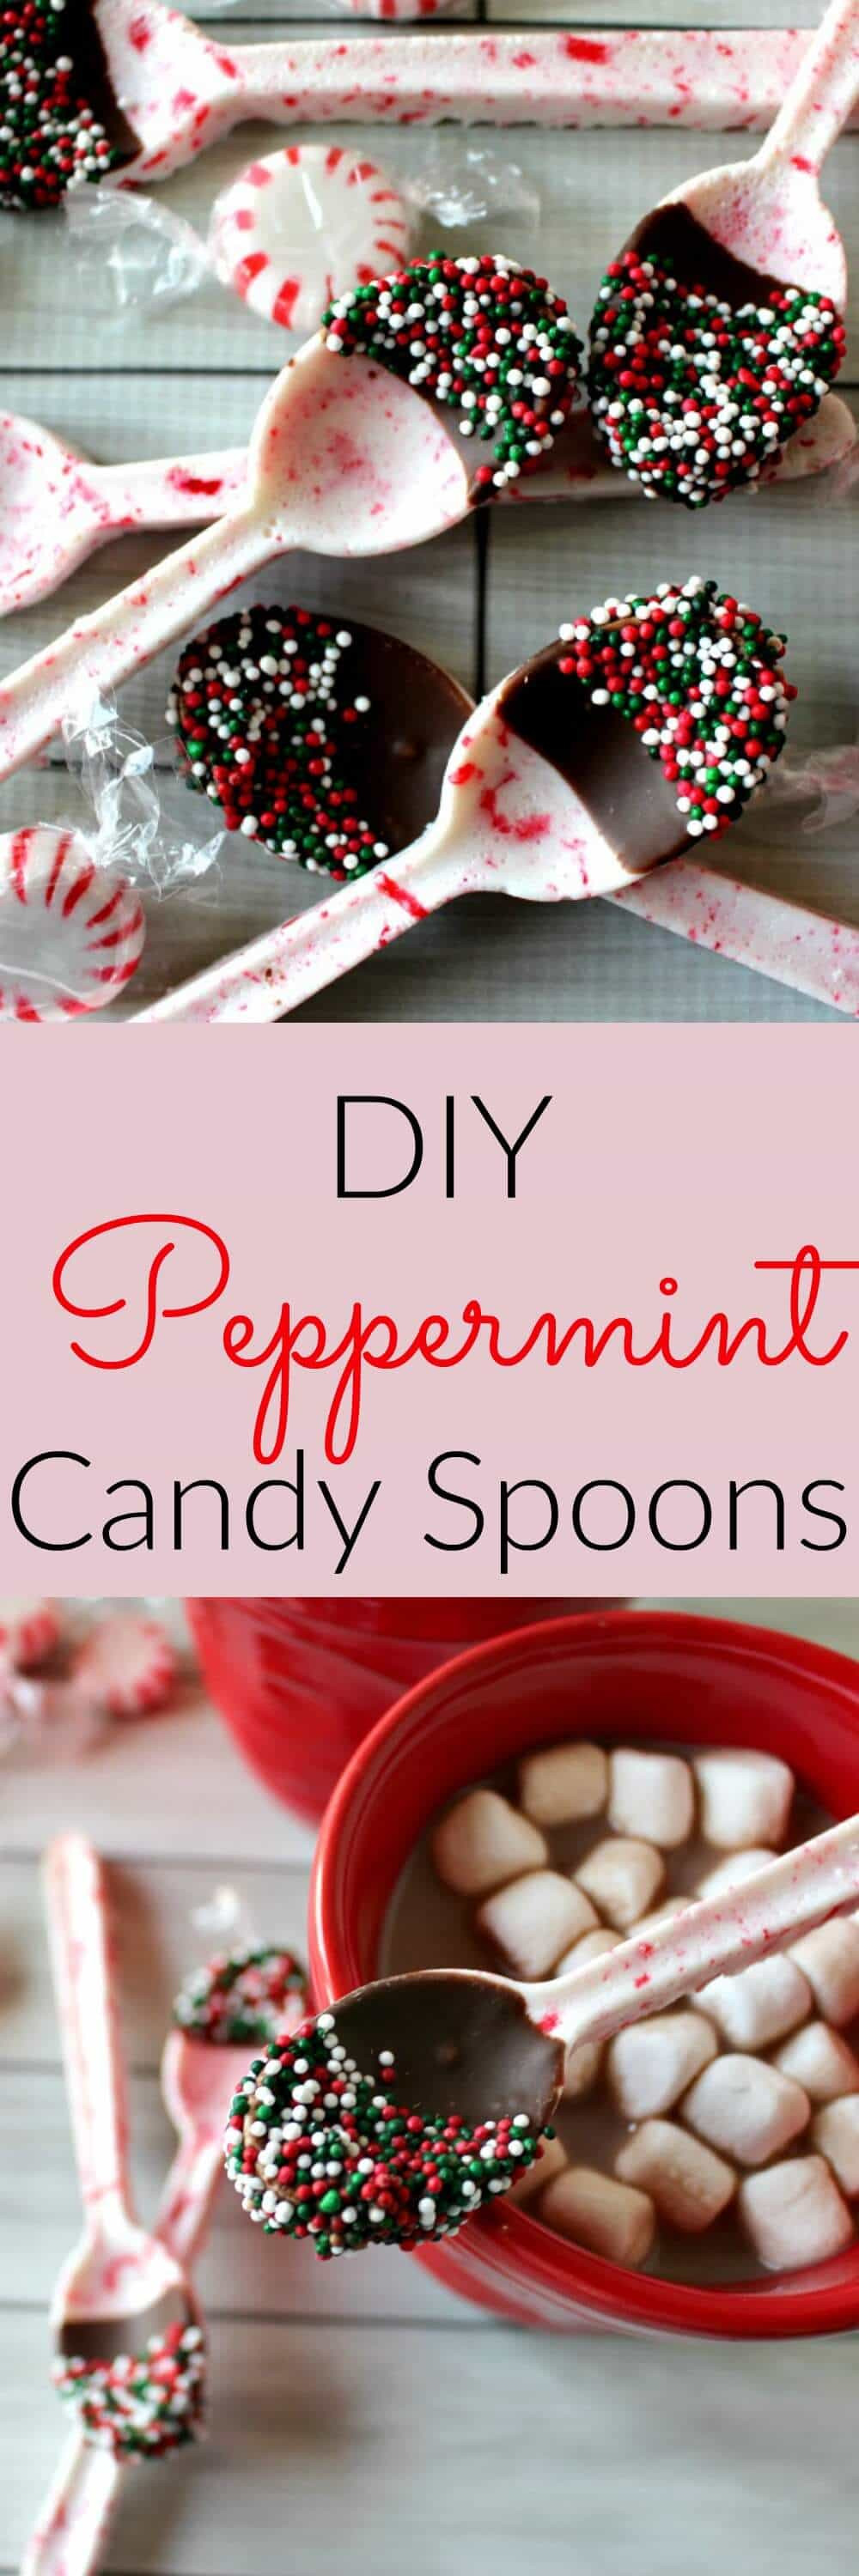 Cute Christmas Candy
 DIY Peppermint Candy Spoons Princess Pinky Girl